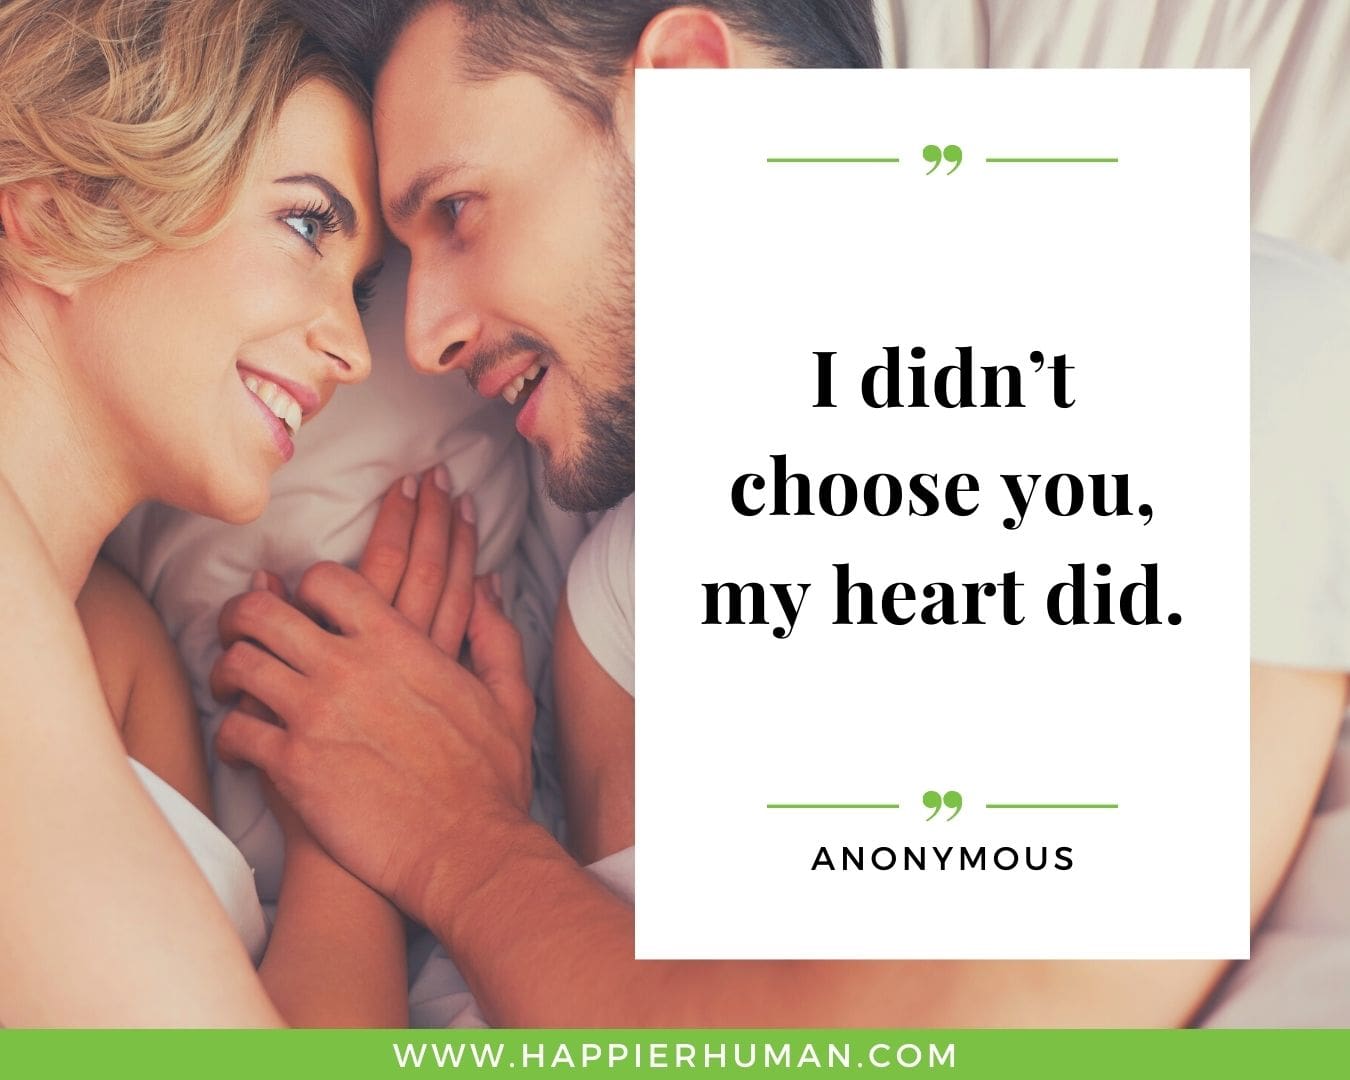 Short, Deep Love Quotes for Her - “I didn’t choose you, my heart did.”- Anonymous